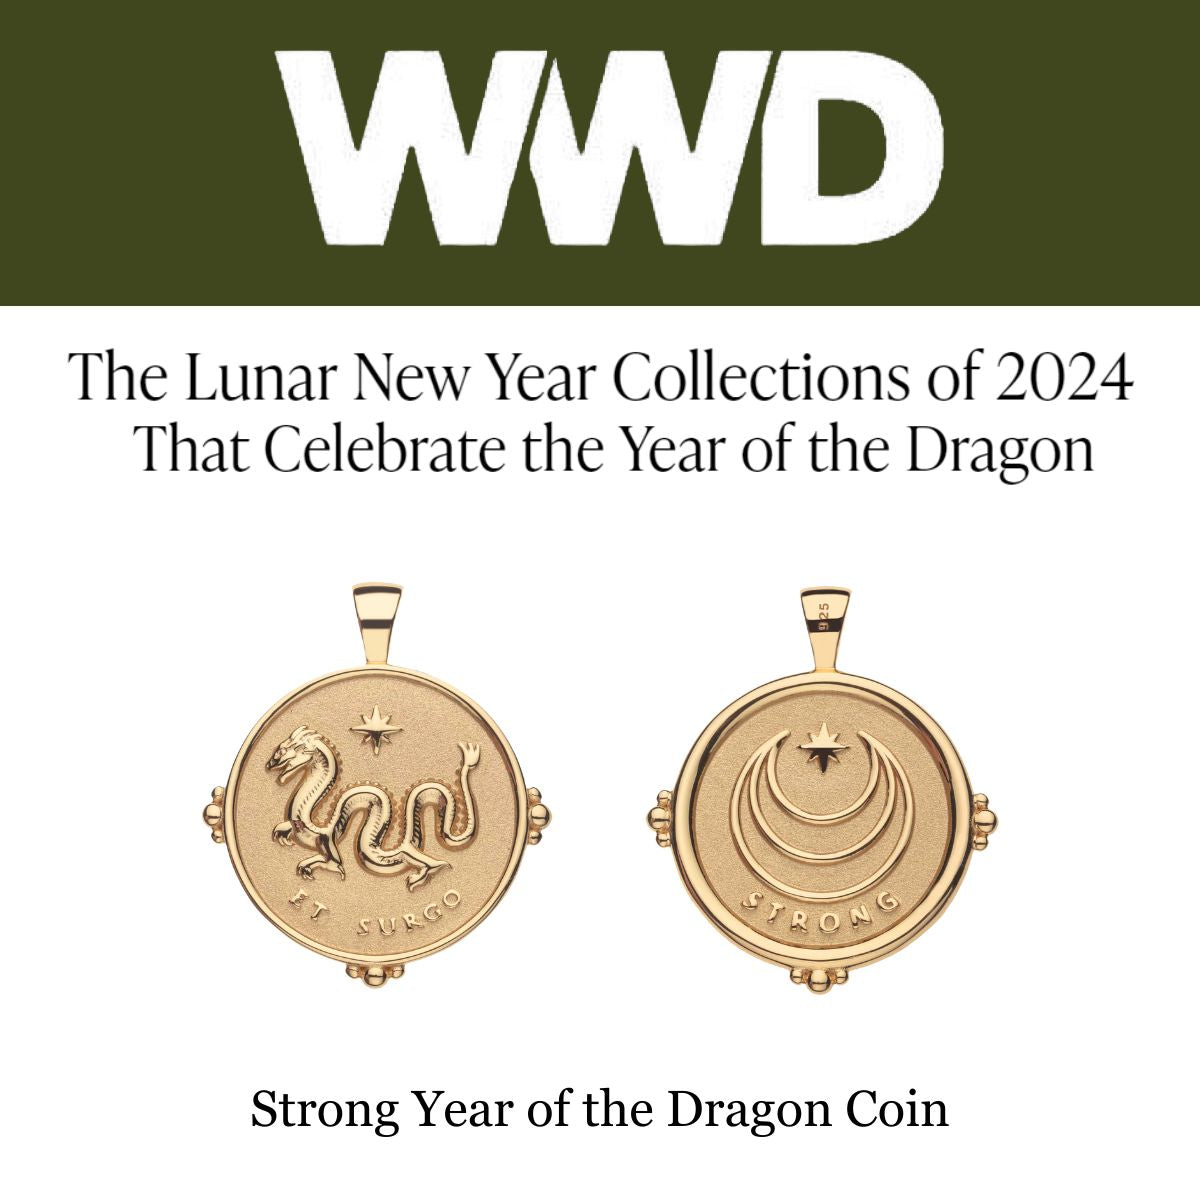 Press Highlight: Women's Wear Daily Features JW Year of the Dragon Coin for The Lunar New Year